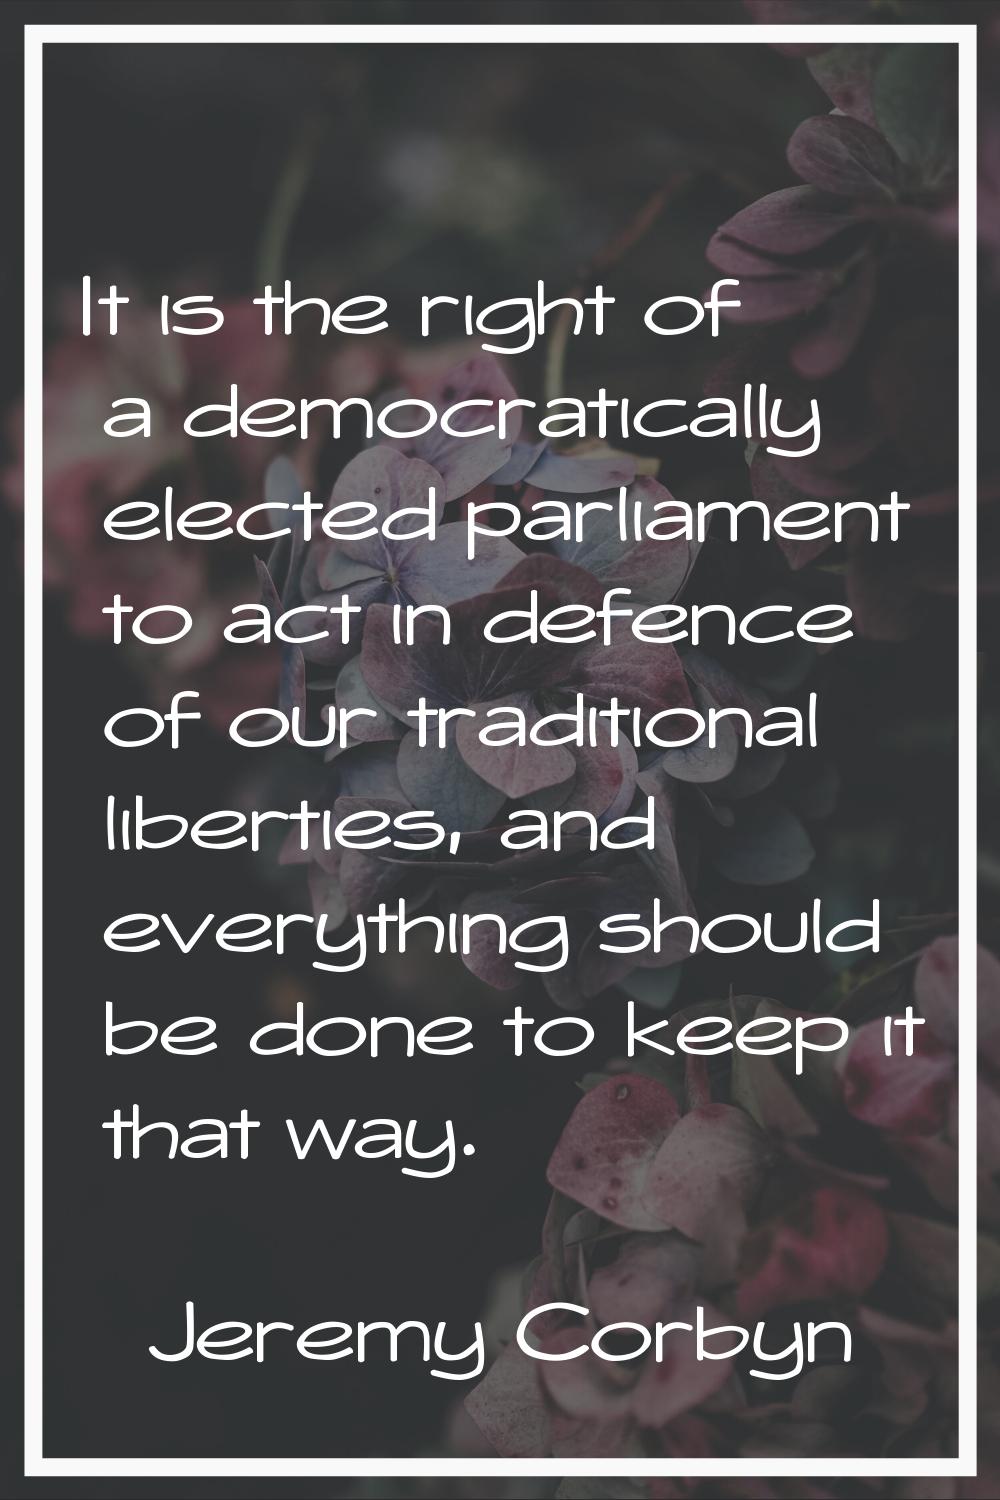 It is the right of a democratically elected parliament to act in defence of our traditional liberti